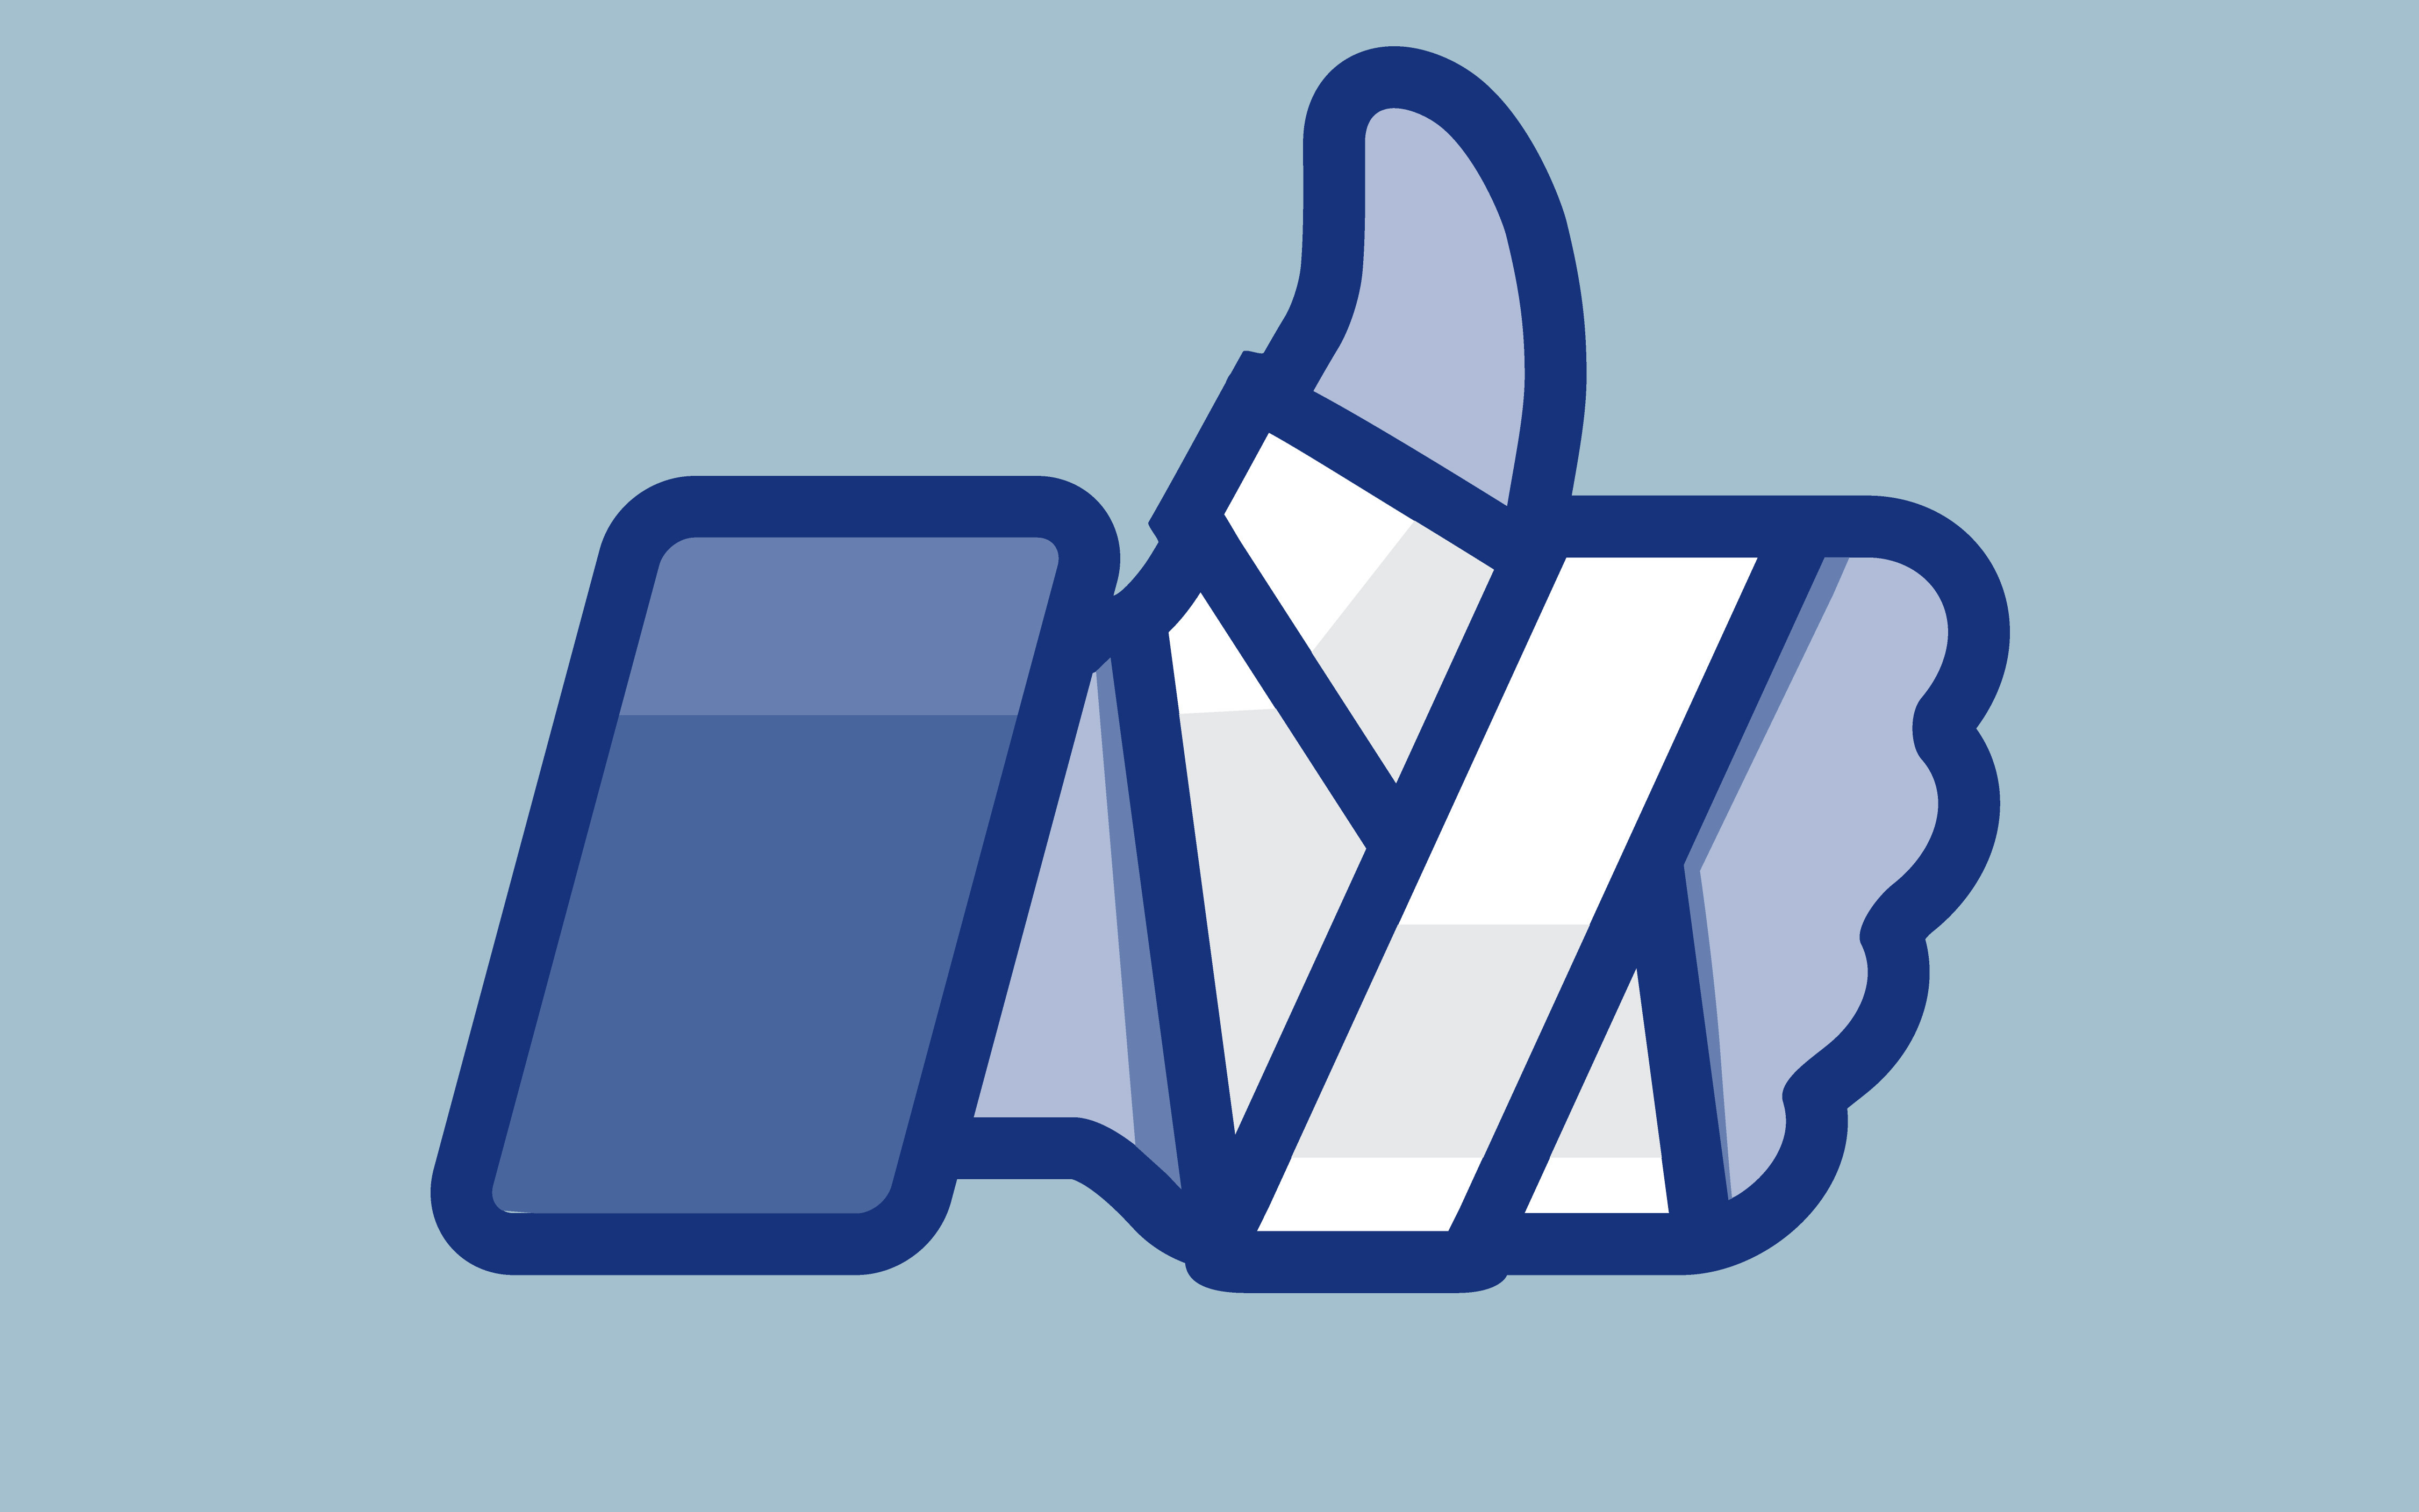 More Likes Can Hurt Your Dental Practice on Facebook